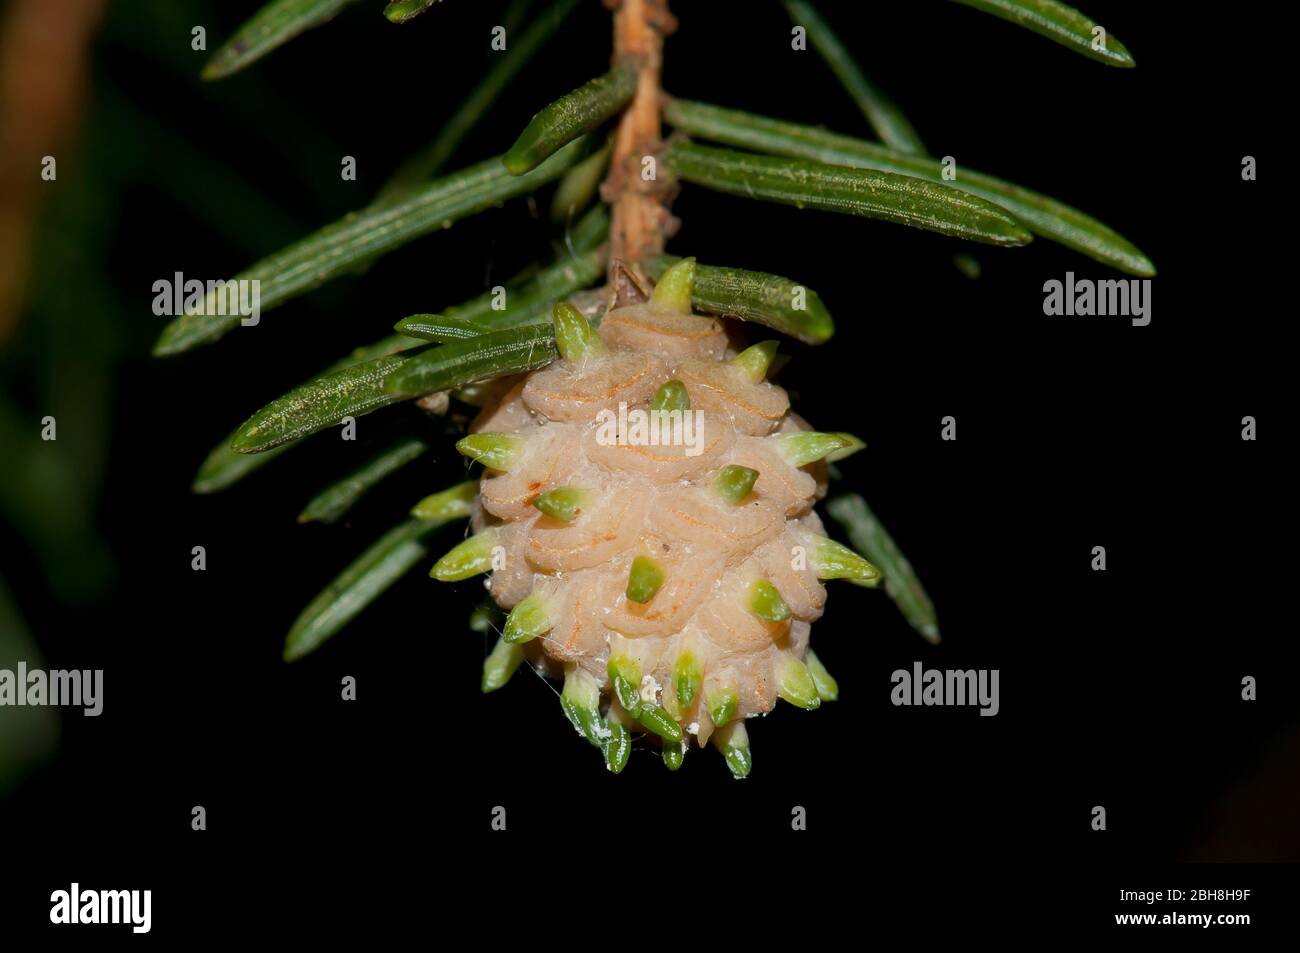 Norway spruce, Picea abies, cones, at the tip of a branch with needles, Bavaria, Germany Stock Photo